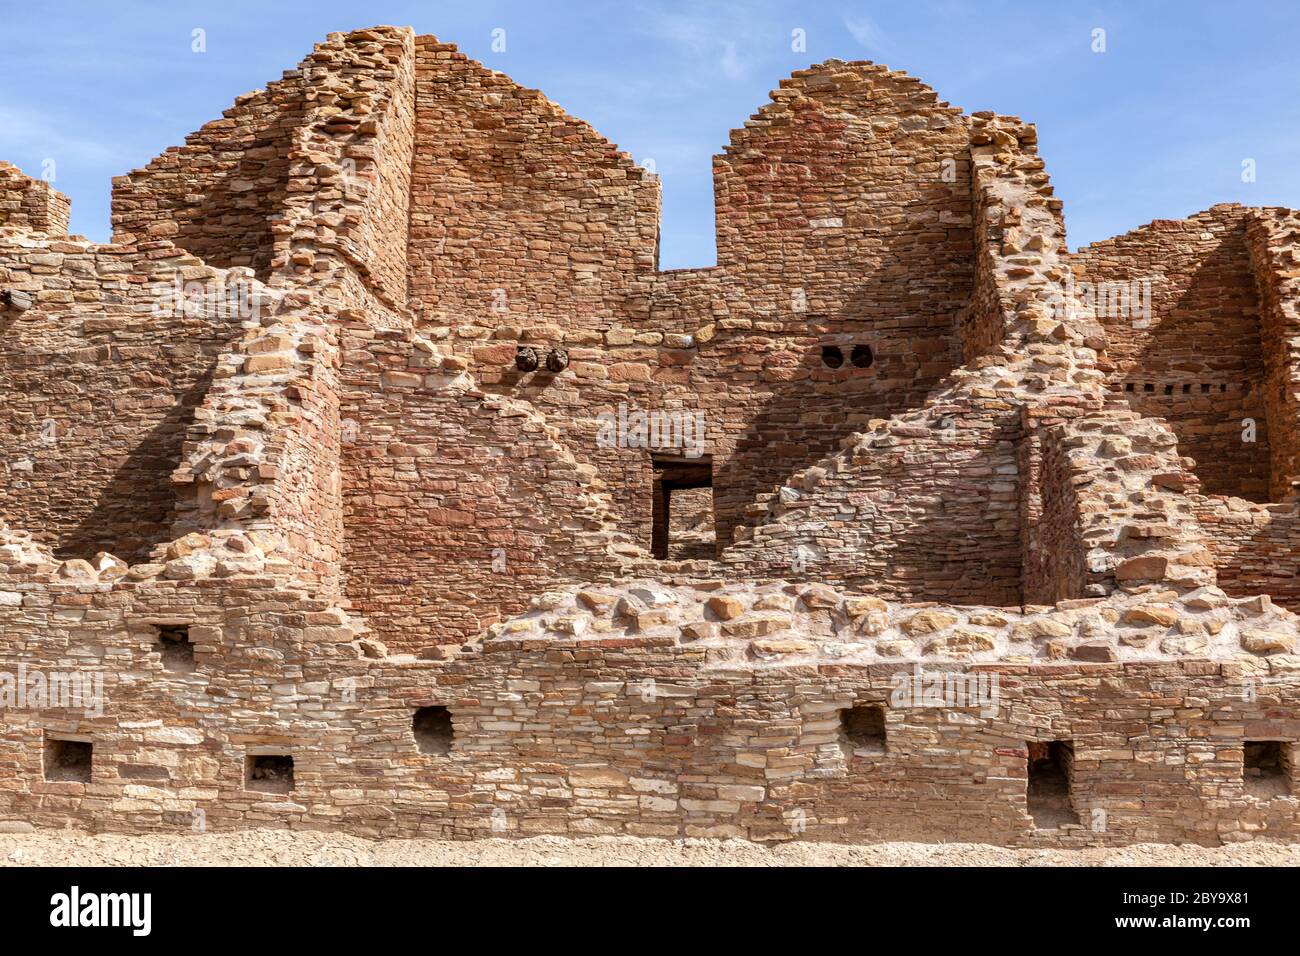 NM00597-00...NEW MEXICO - Masonry stone walls Pueblo De Arroyo built by the early Chaco People.  Chaco Culture National Historic Park. Stock Photo